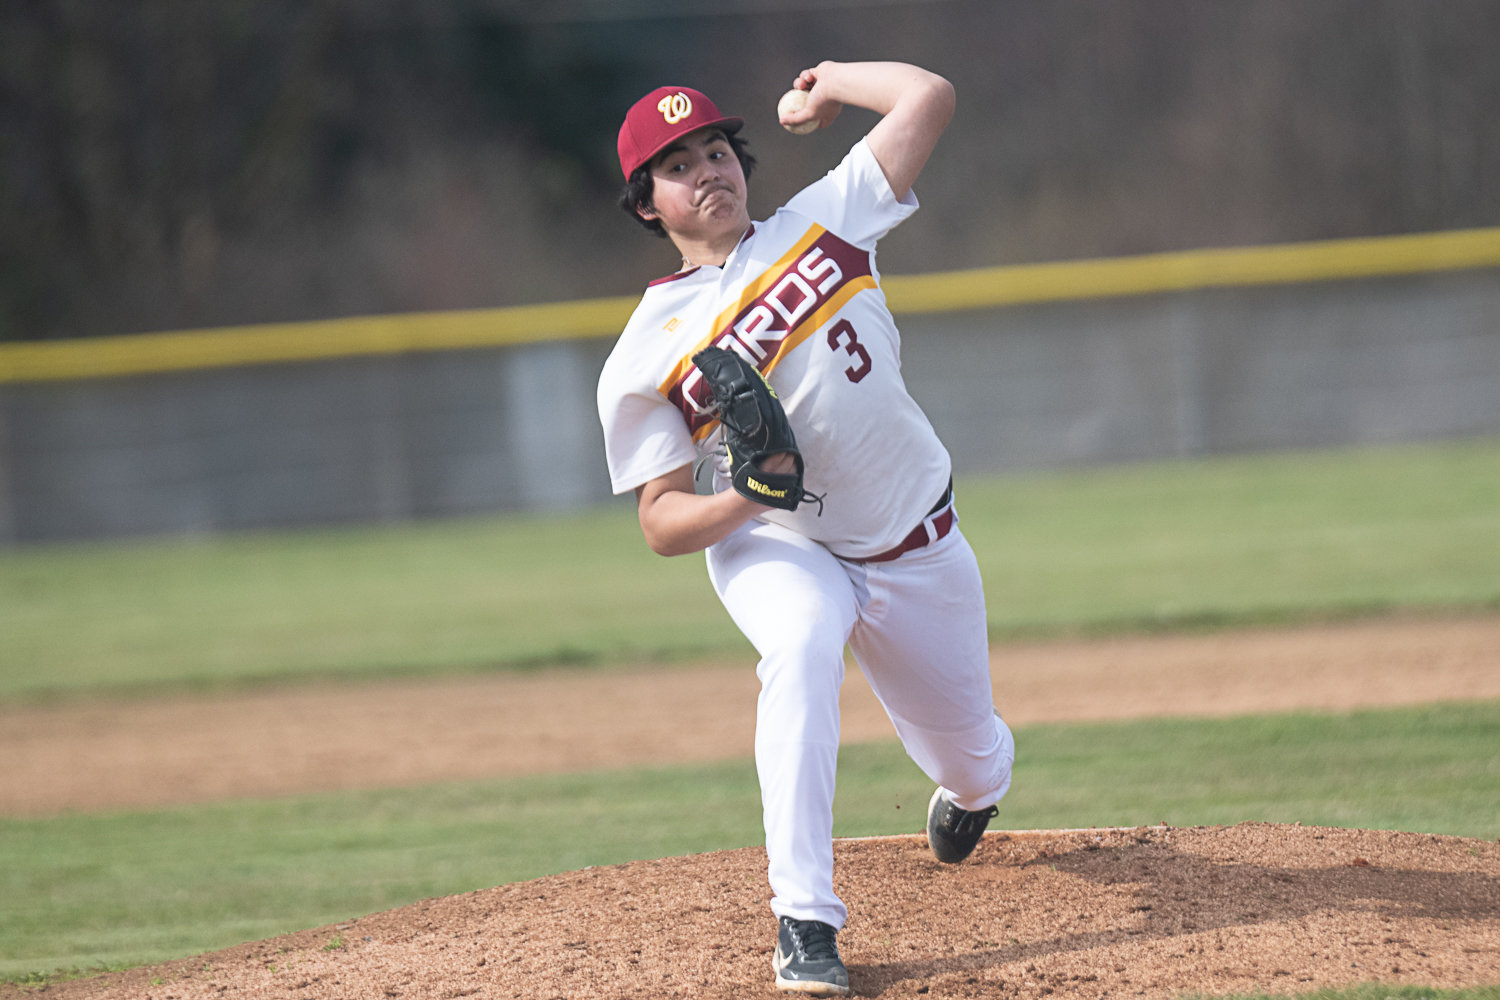 Kyrin Meehan throws a pitch during the first of Winlock's two games against Morton-White Pass on March 27